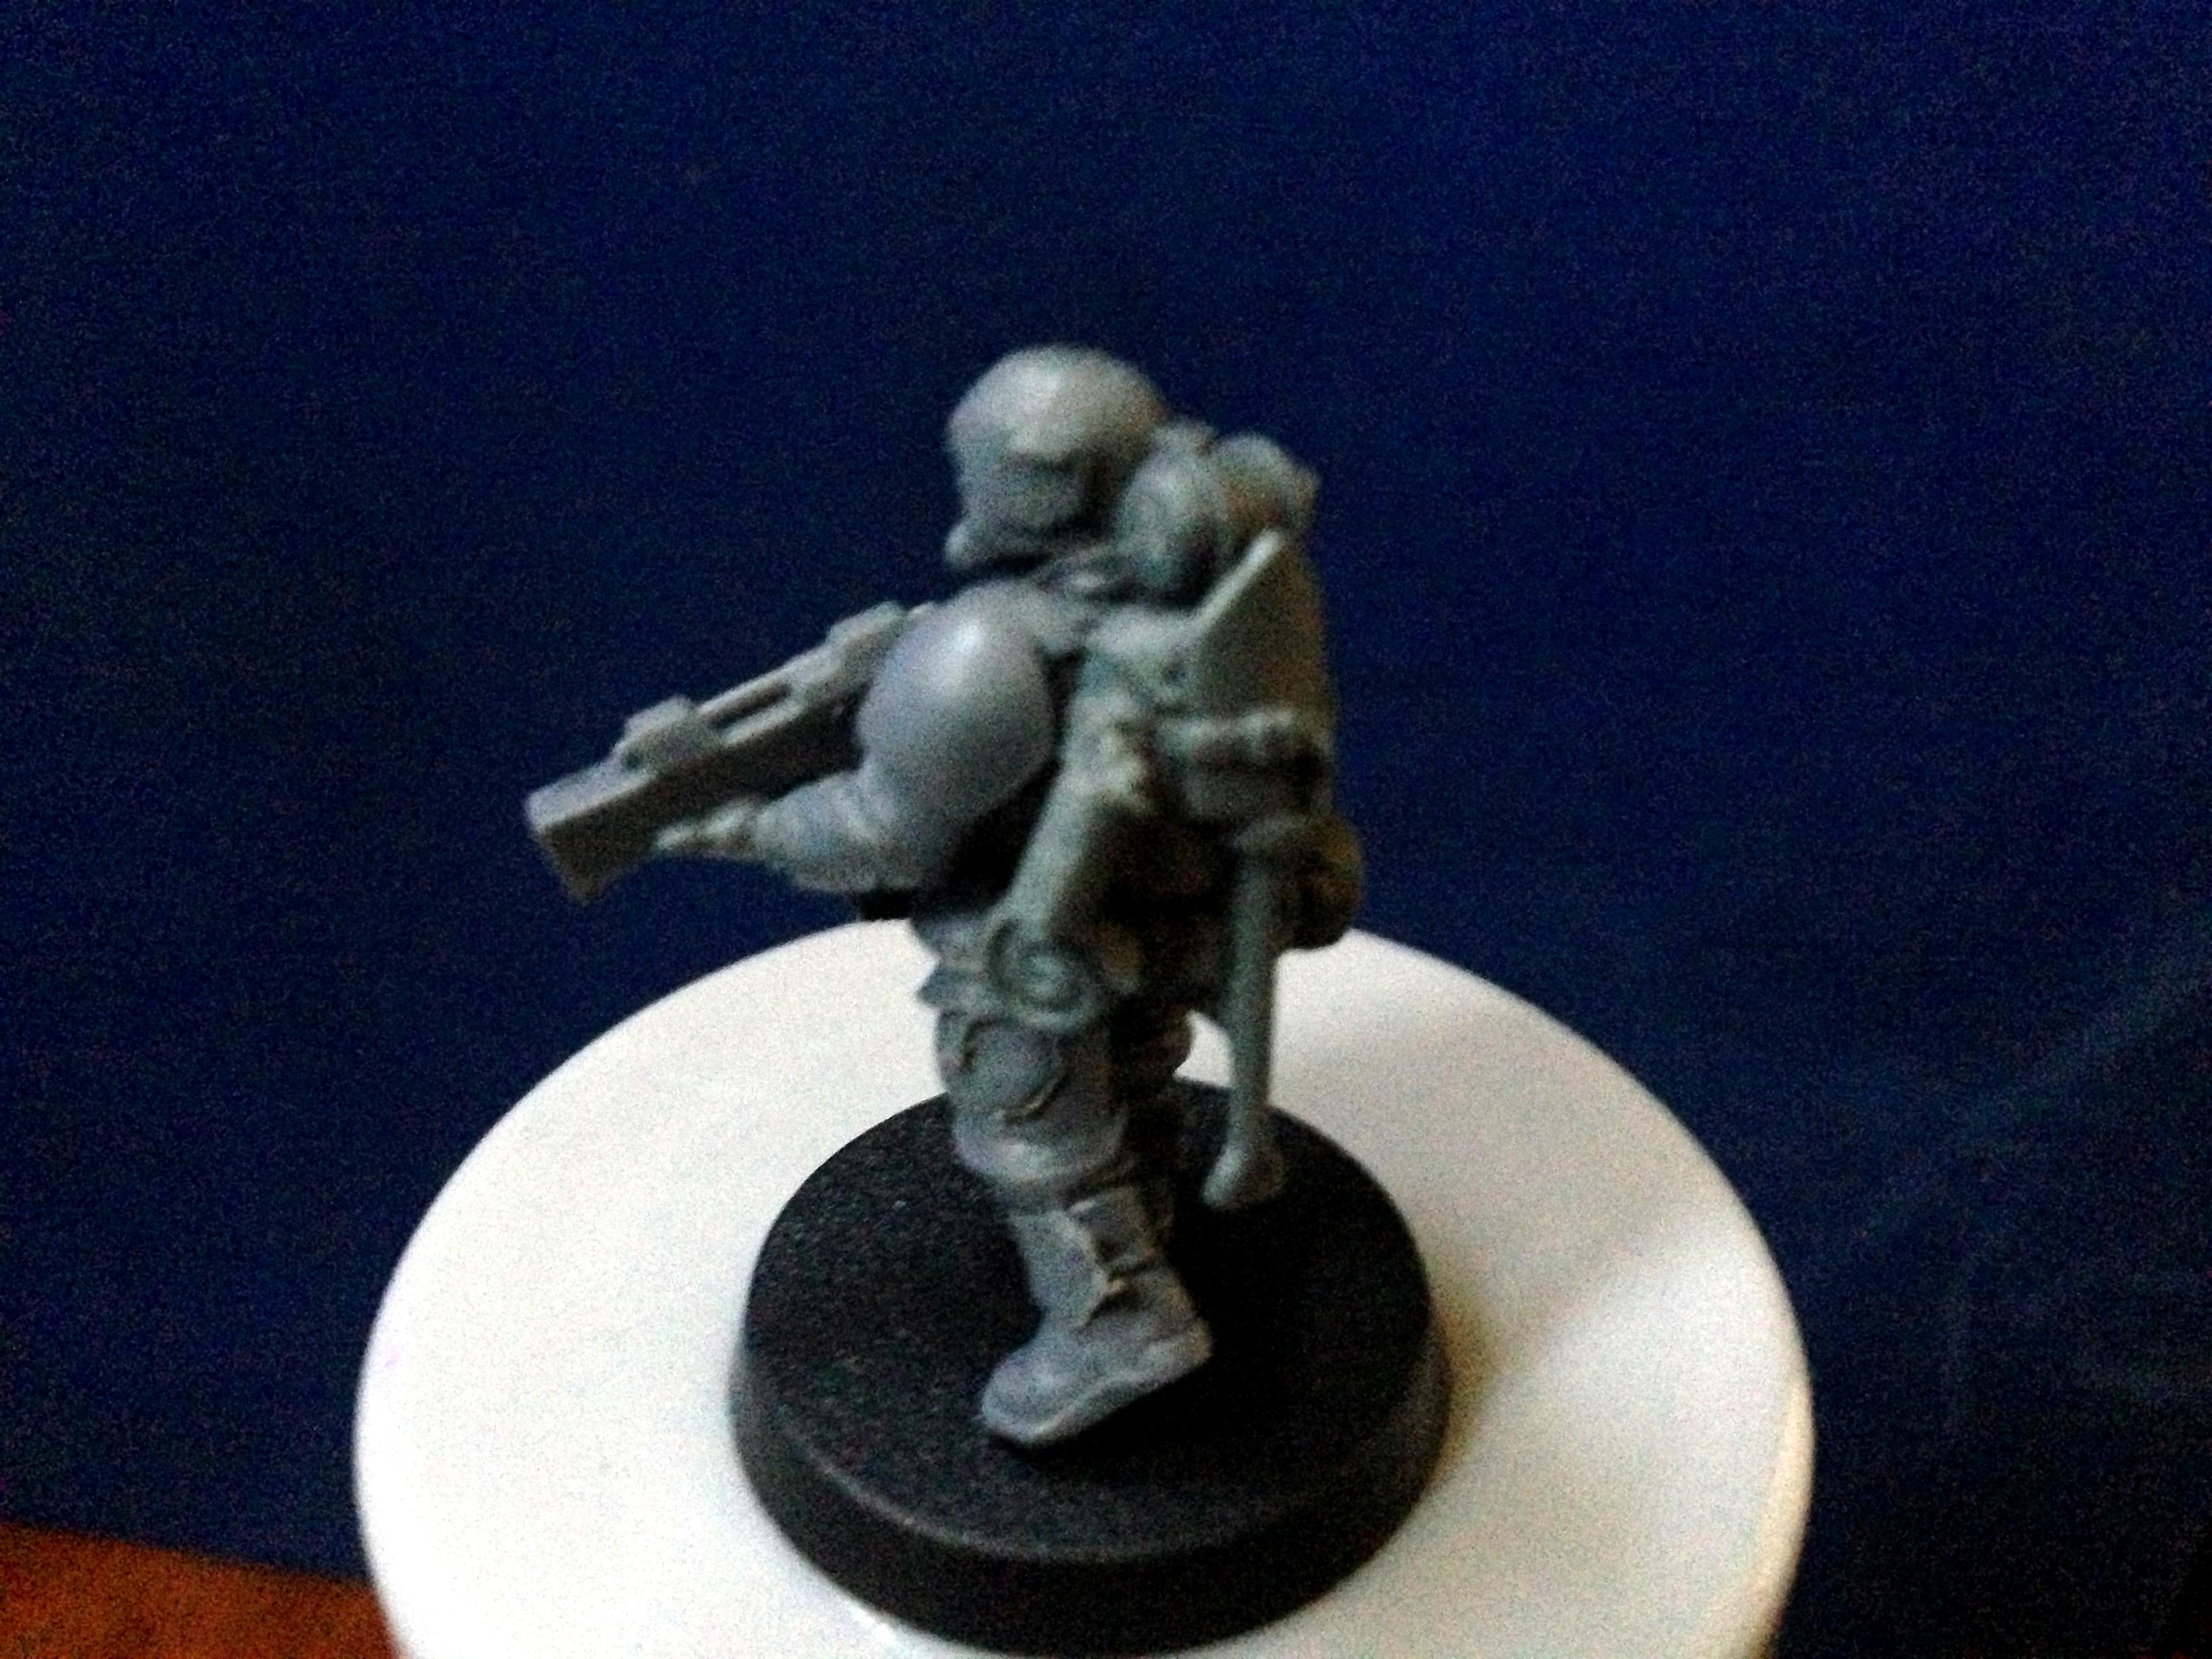 Cadians, Conversion, Imperial Guard, Paratroopers, Special Forces, Spetsnaz, Warhammer 40,000